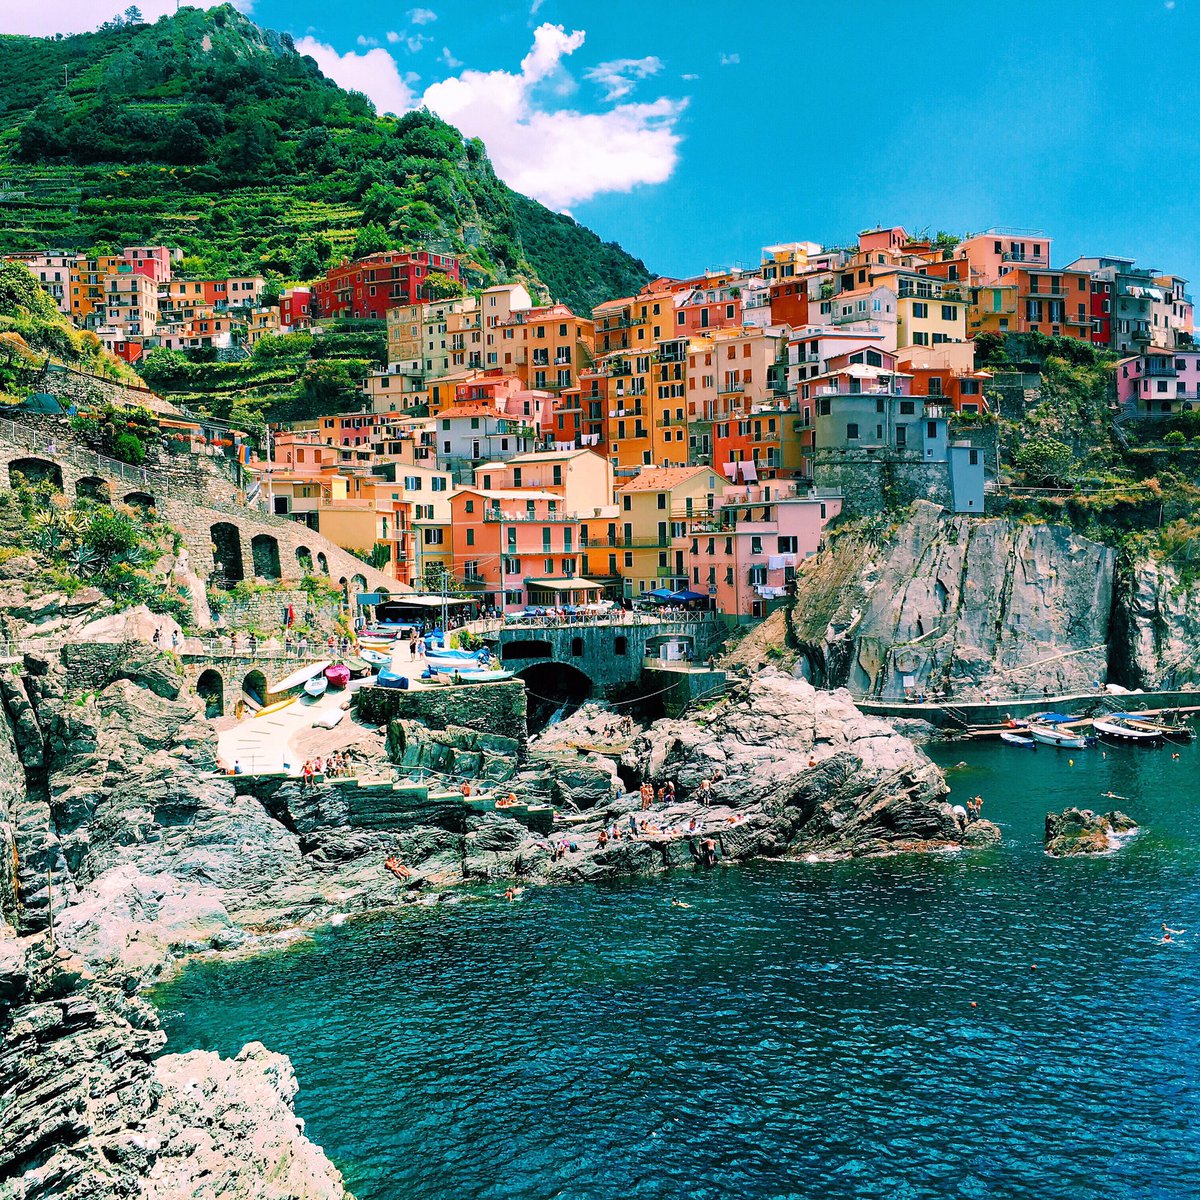 There are no words ???????????????? More pics of Cinque Terre here https://t.co/kxLxE7OB26 https://t.co/MBR1Z9fBQ9